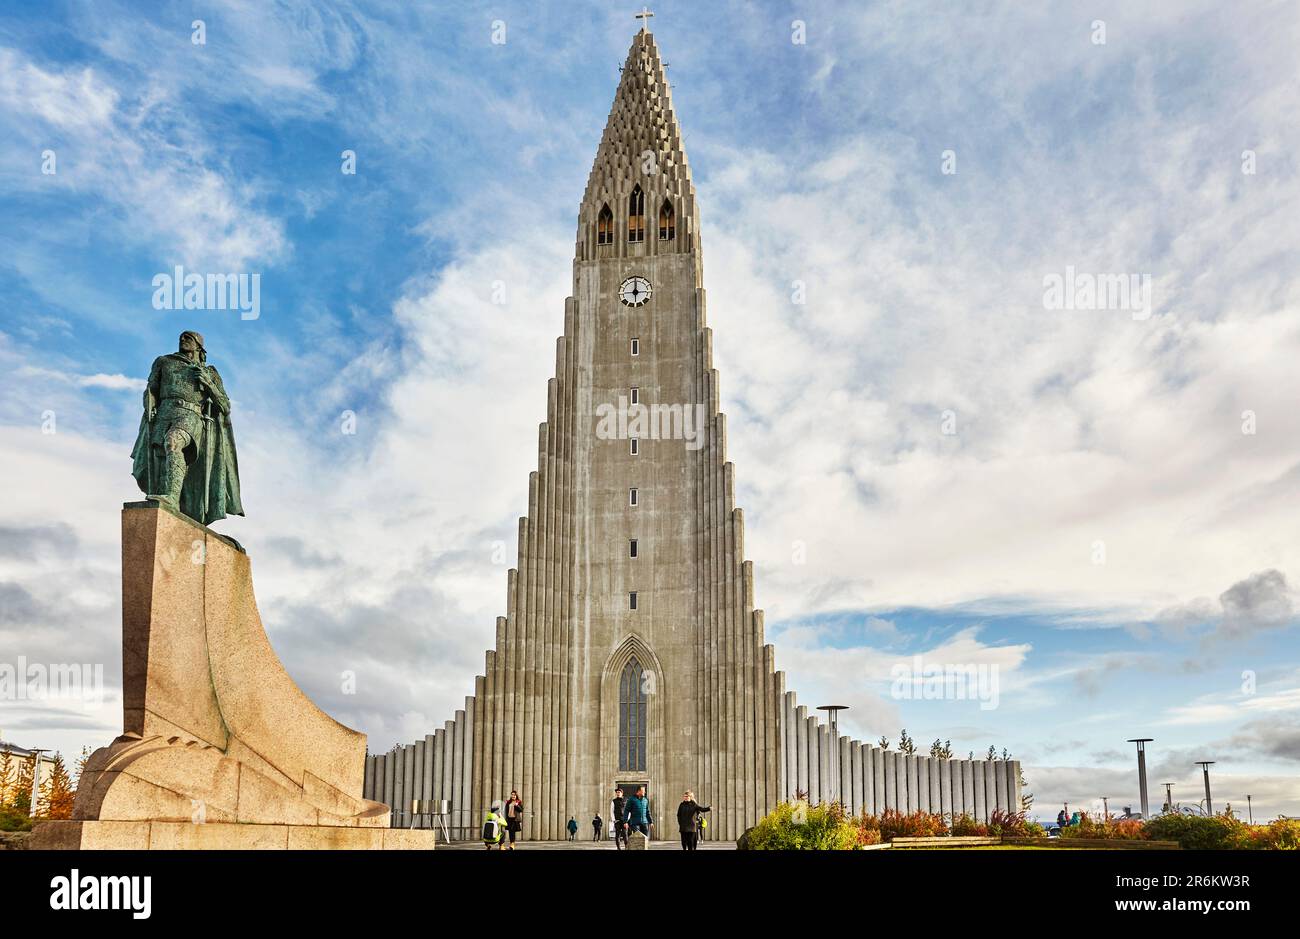 The spire of Hallgrimskirkja Church, fronted by a statue of Leifur Eriksson, founder of Iceland, in central Reykjavik, Iceland, Polar Regions Stock Photo